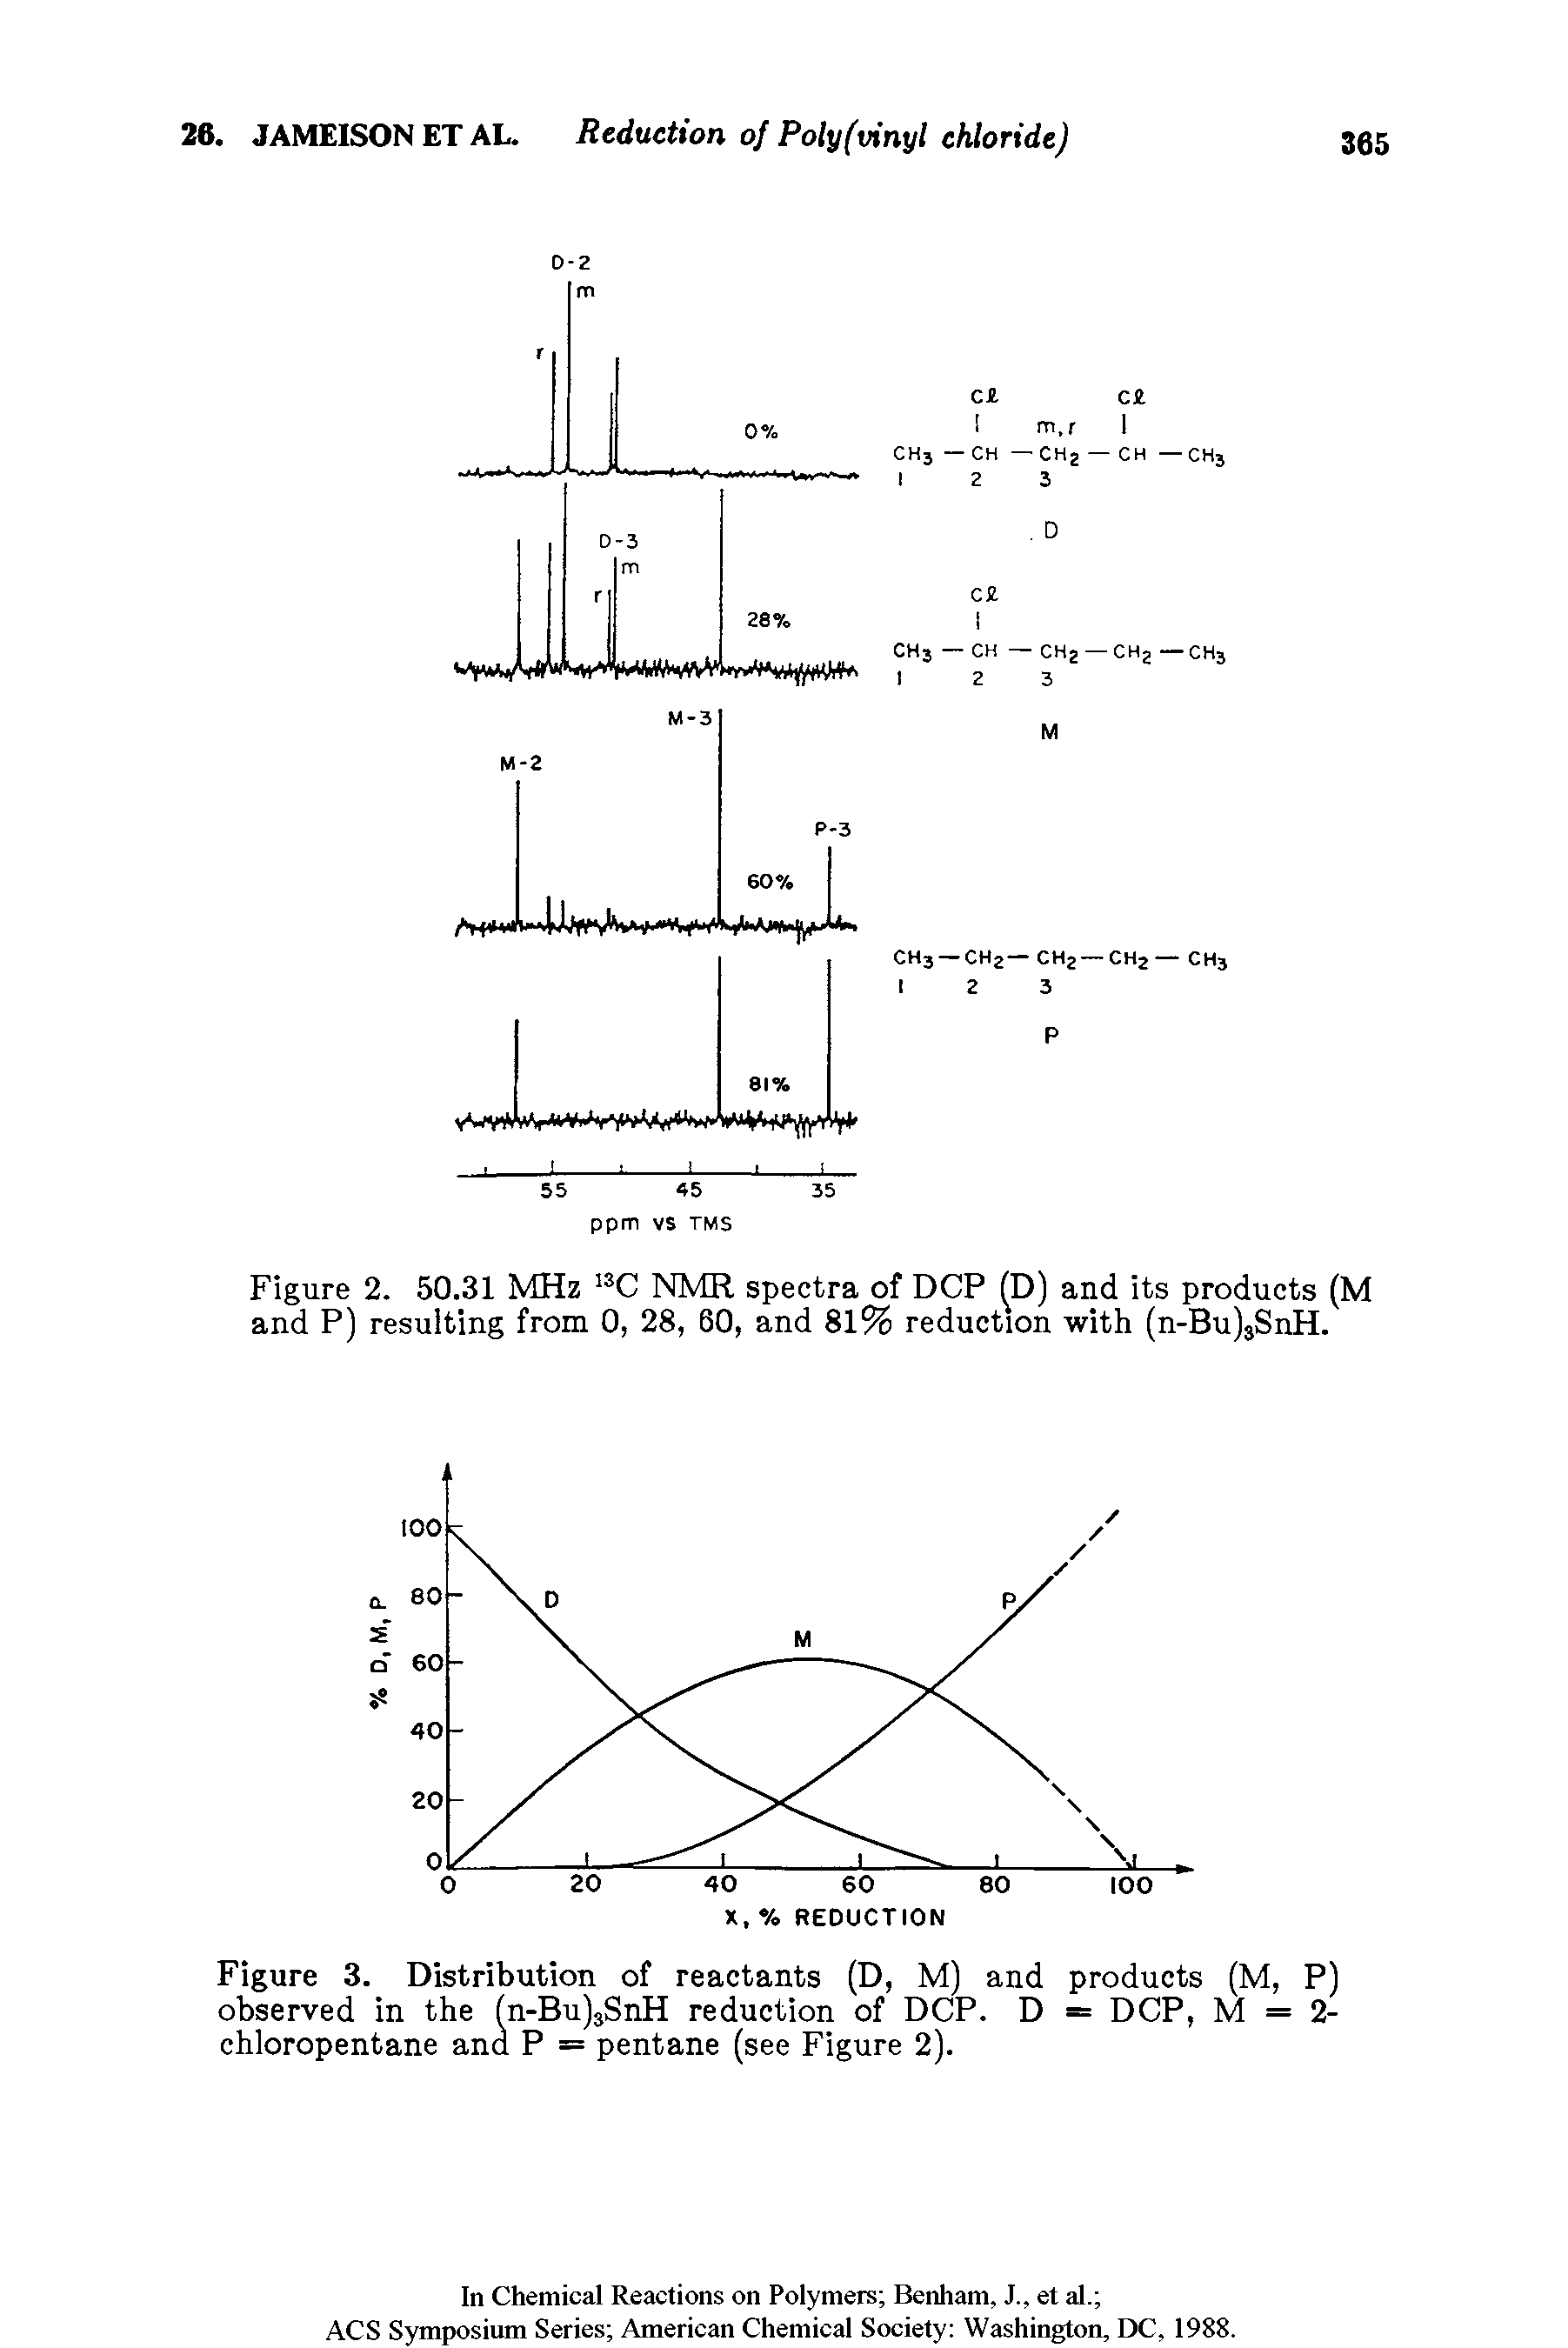 Figure 3. Distribution of reactants (D, M) and products (M, P) observed in the (n-Bu)3SnH reduction of DCP. D = DCP, M = 2-chloropentane and P = pentane (see Figure 2).